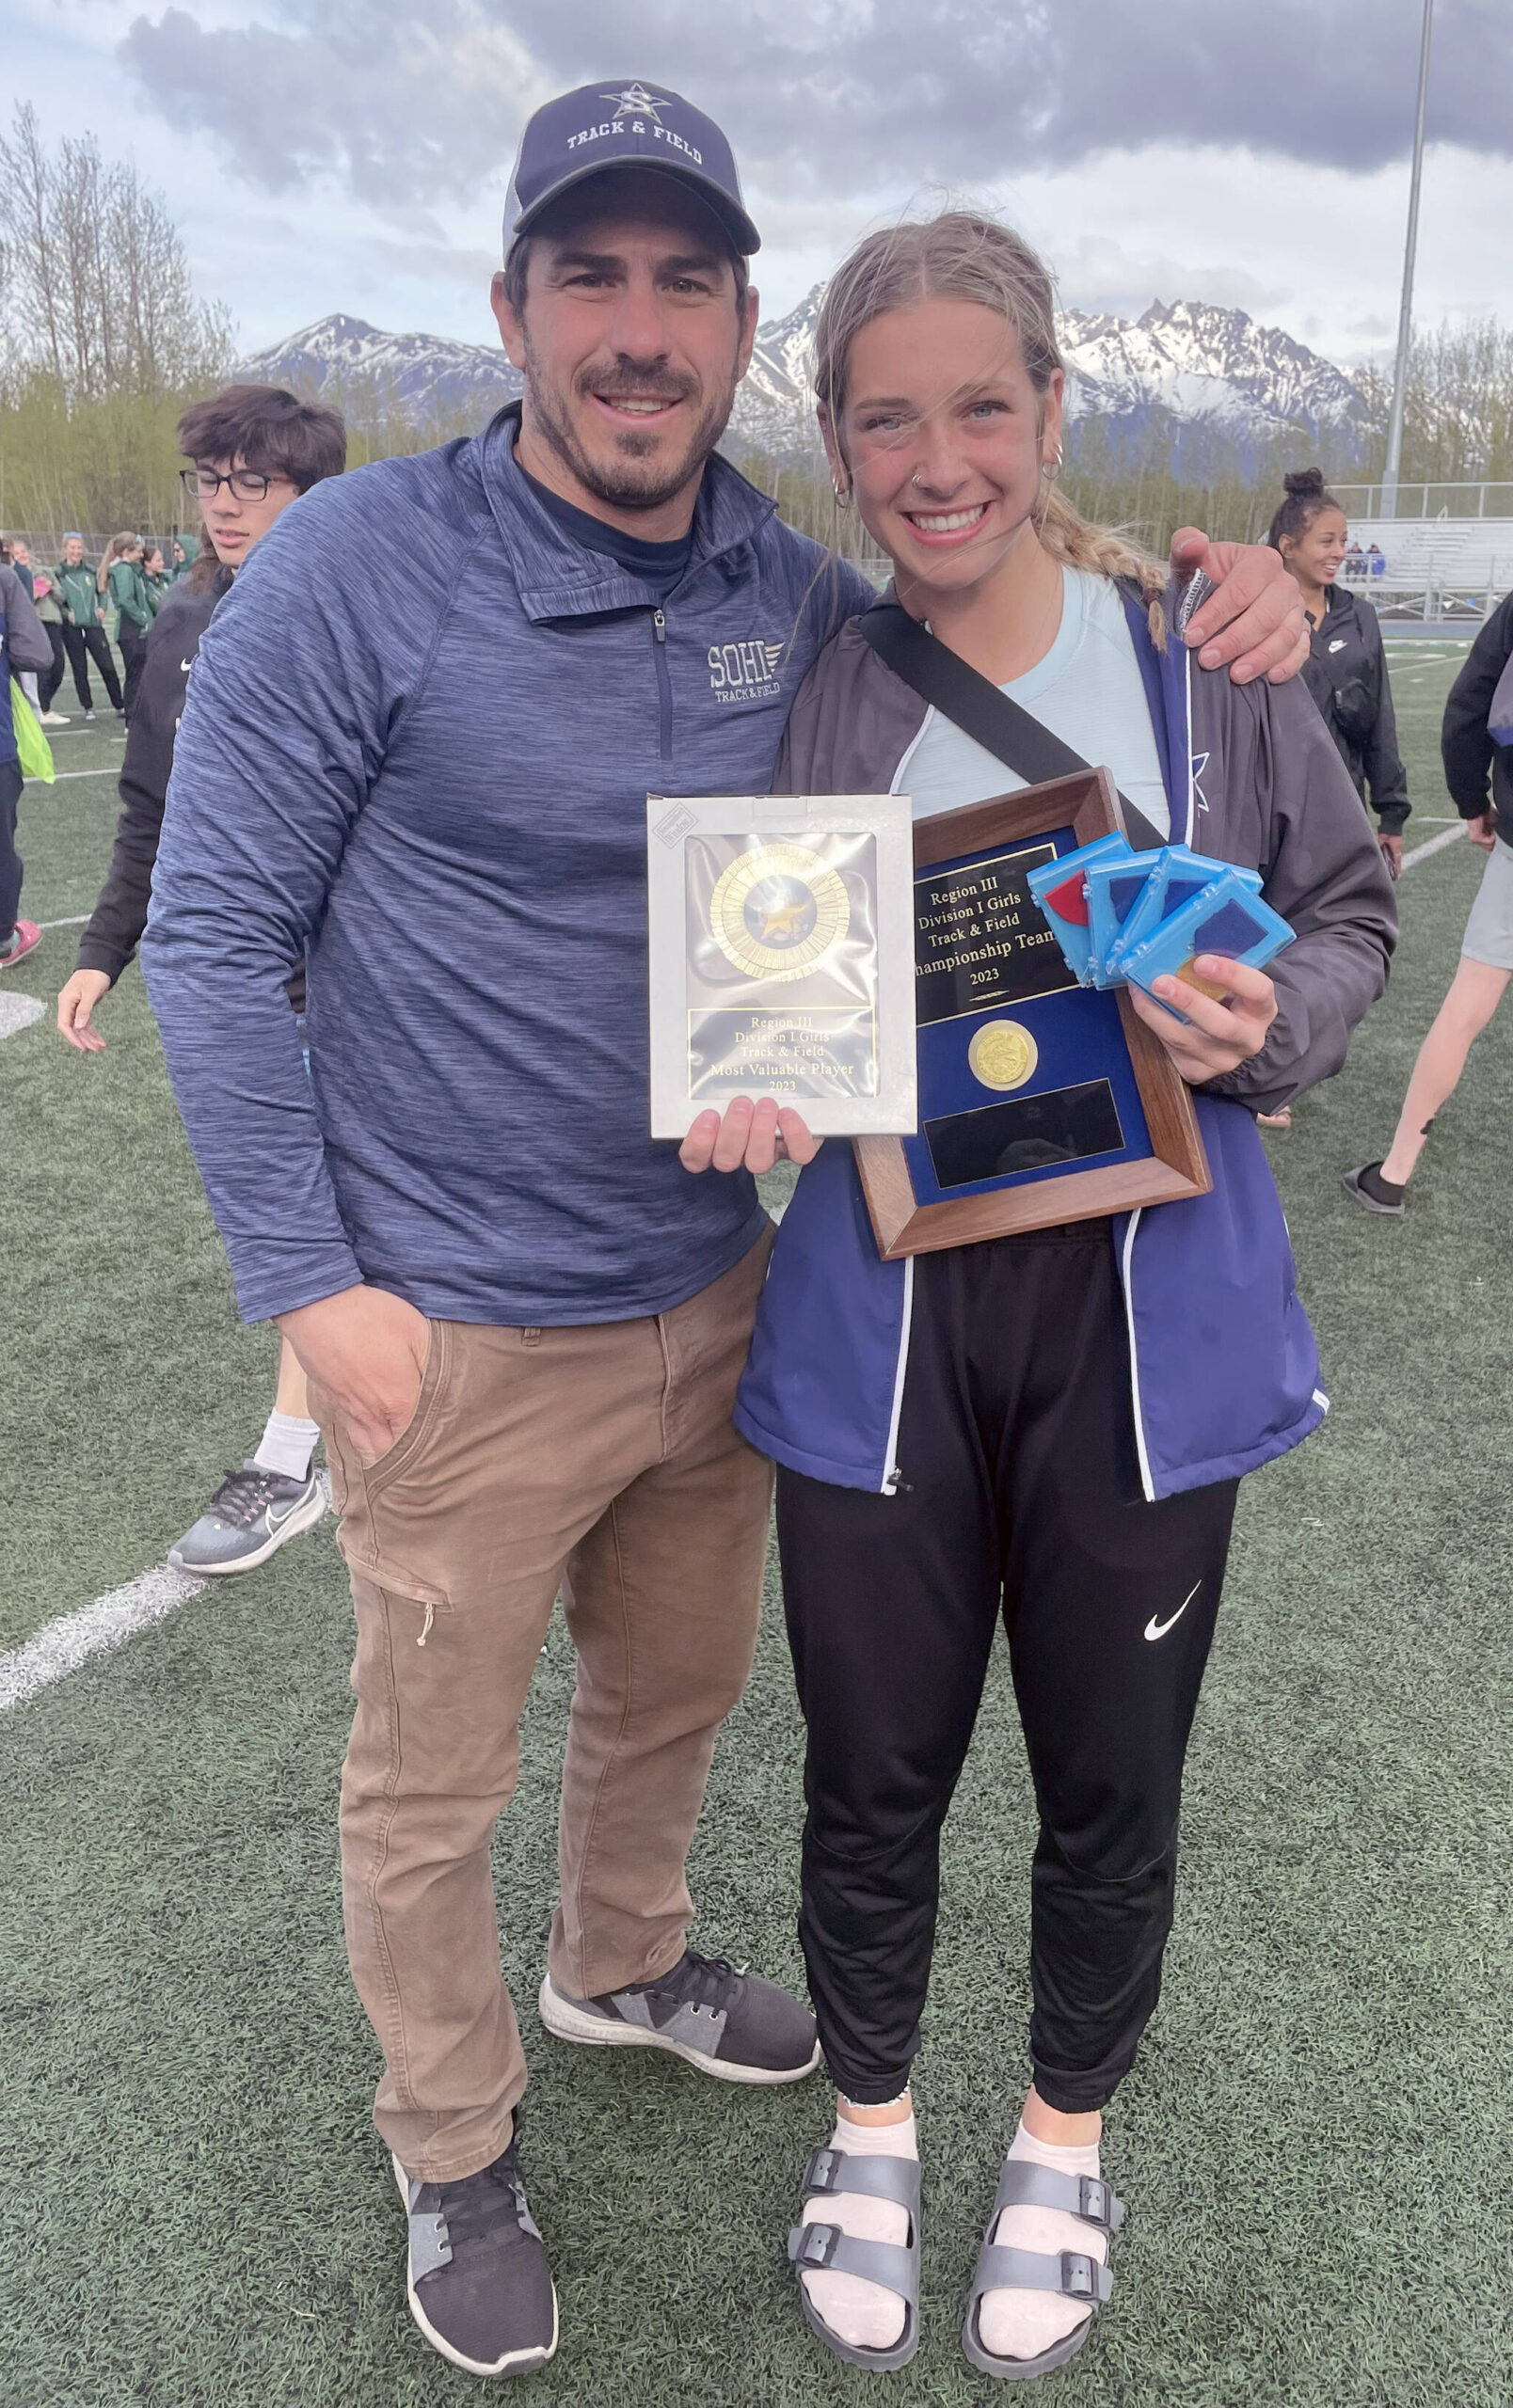 Phil Leck and Katelyn Morrison on Saturday, May 21, 2023, at the Region 3/Division I track and field meet at Palmer High School in Palmer, Alaska. Morrison was named the Region 3 athlete of the year. (Photo provided)